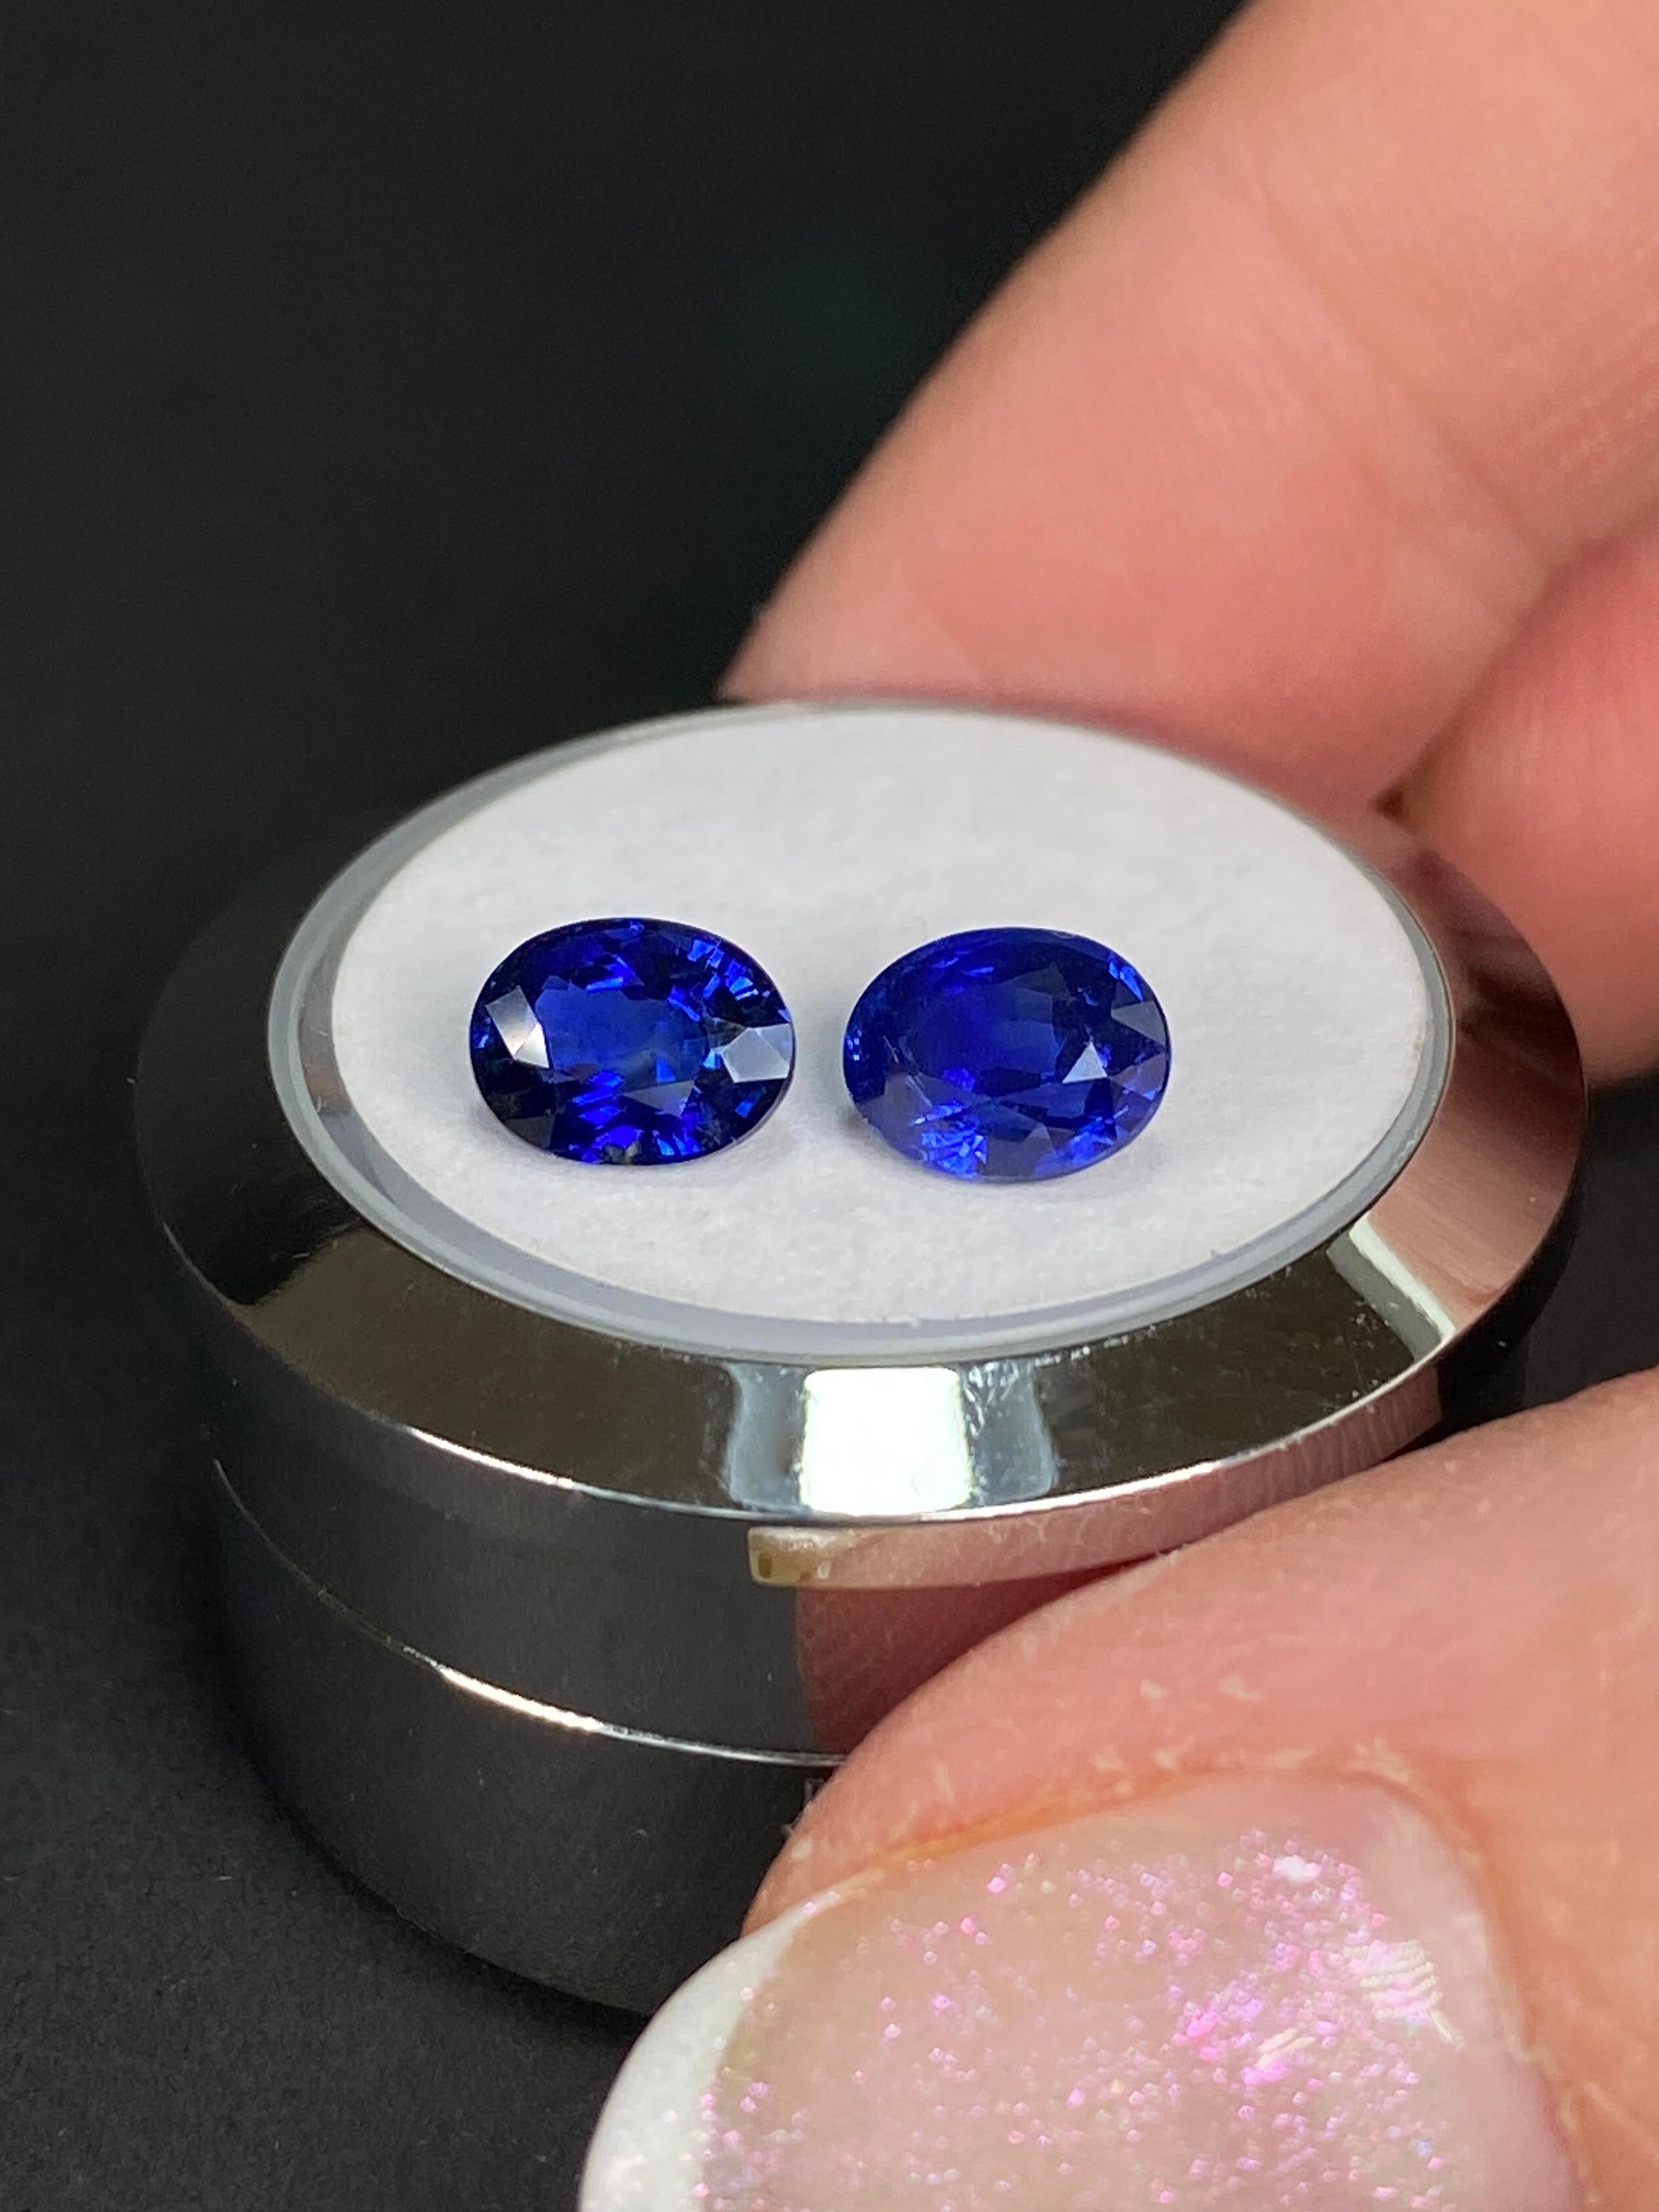 The Sapphire Merchant presents this Vivid Royal Blue Sapphire Pair, a true embodiment of luxury and elegance. This exceptional duo combines a total weight of 2.53 carats, with one gemstone weighing 1.23 carats and the other 1.30 carats. Both gems